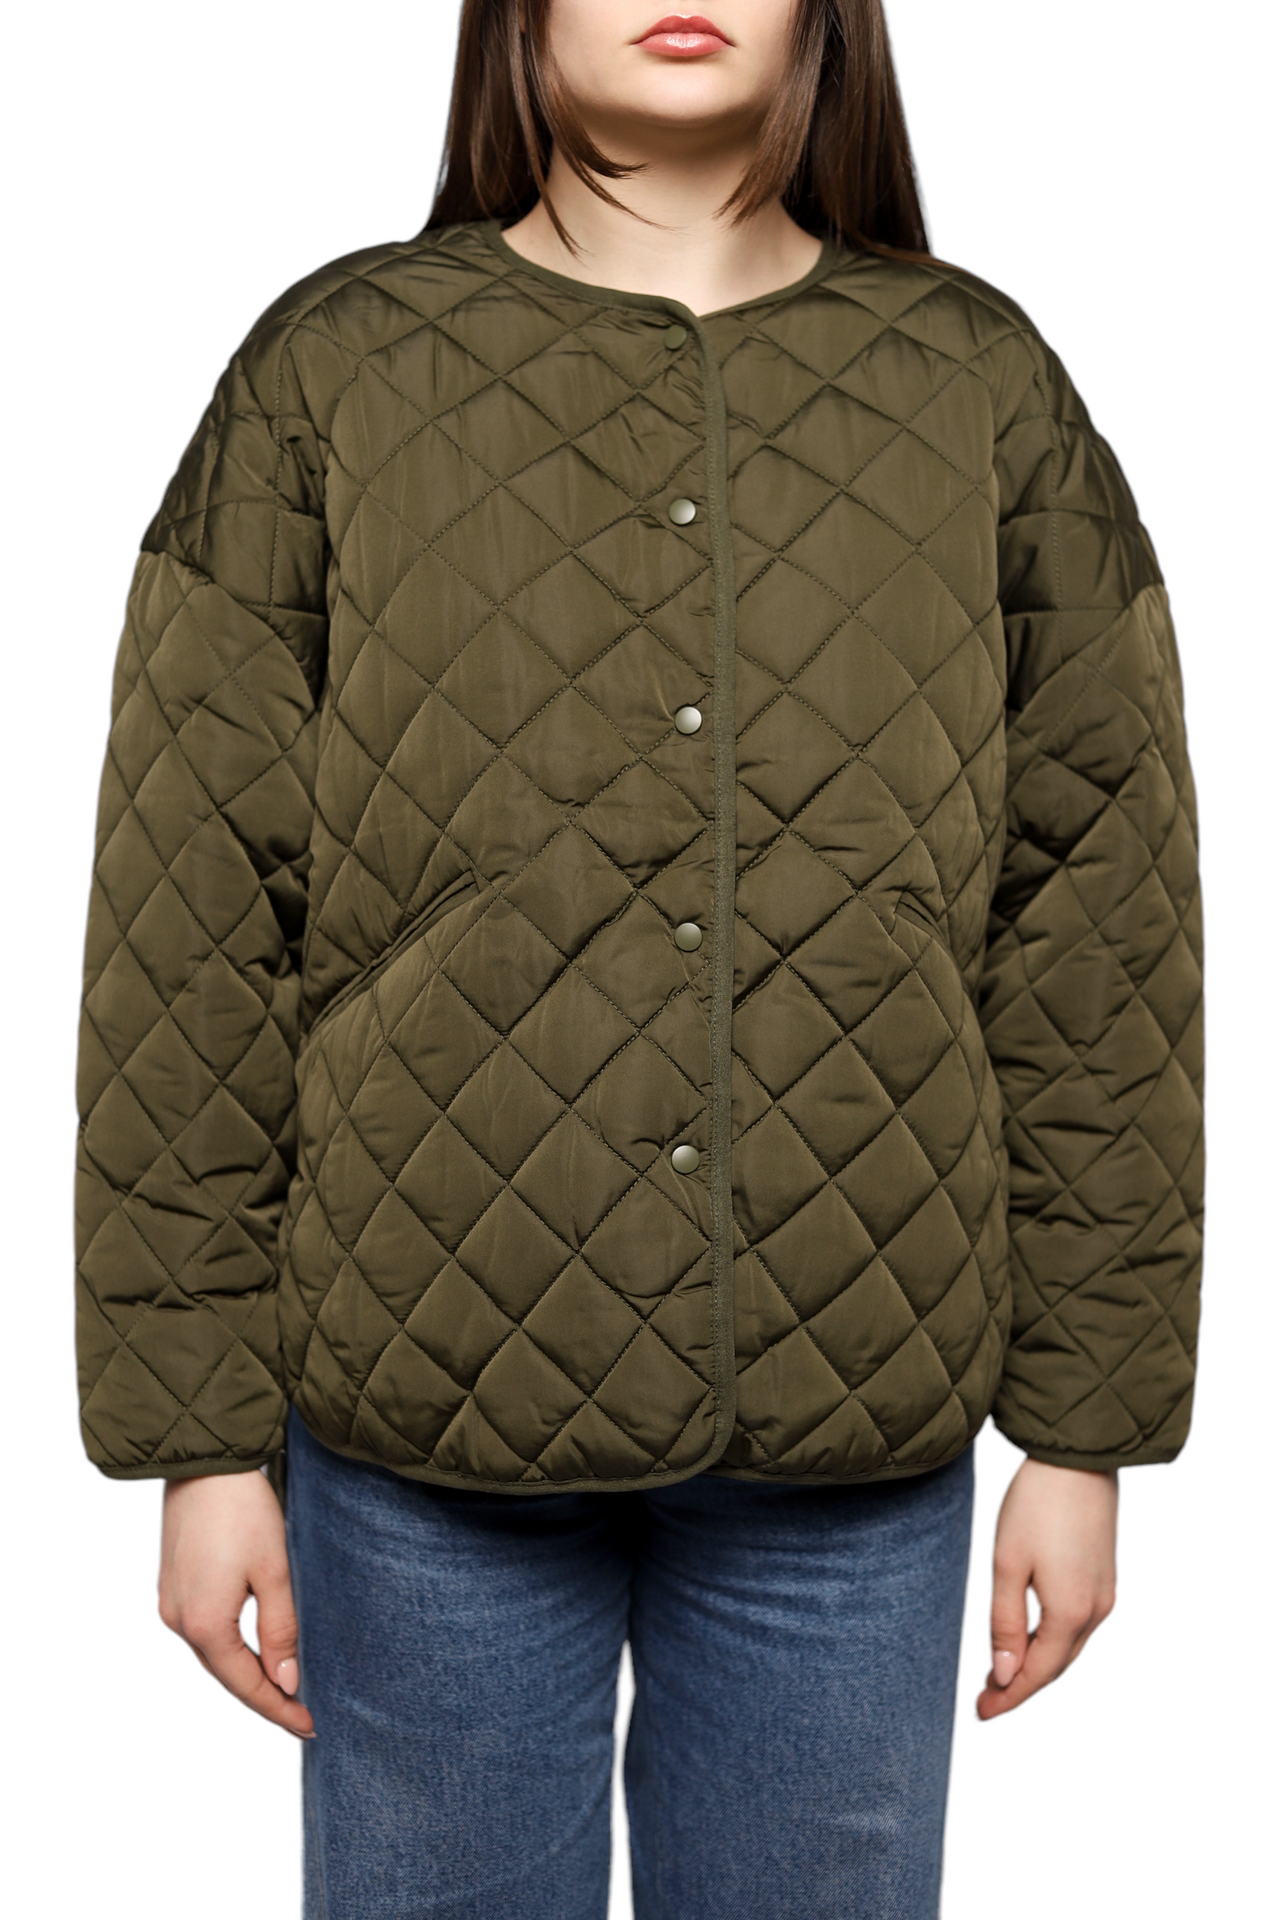 Toteme Quilted Jacket Cornichon